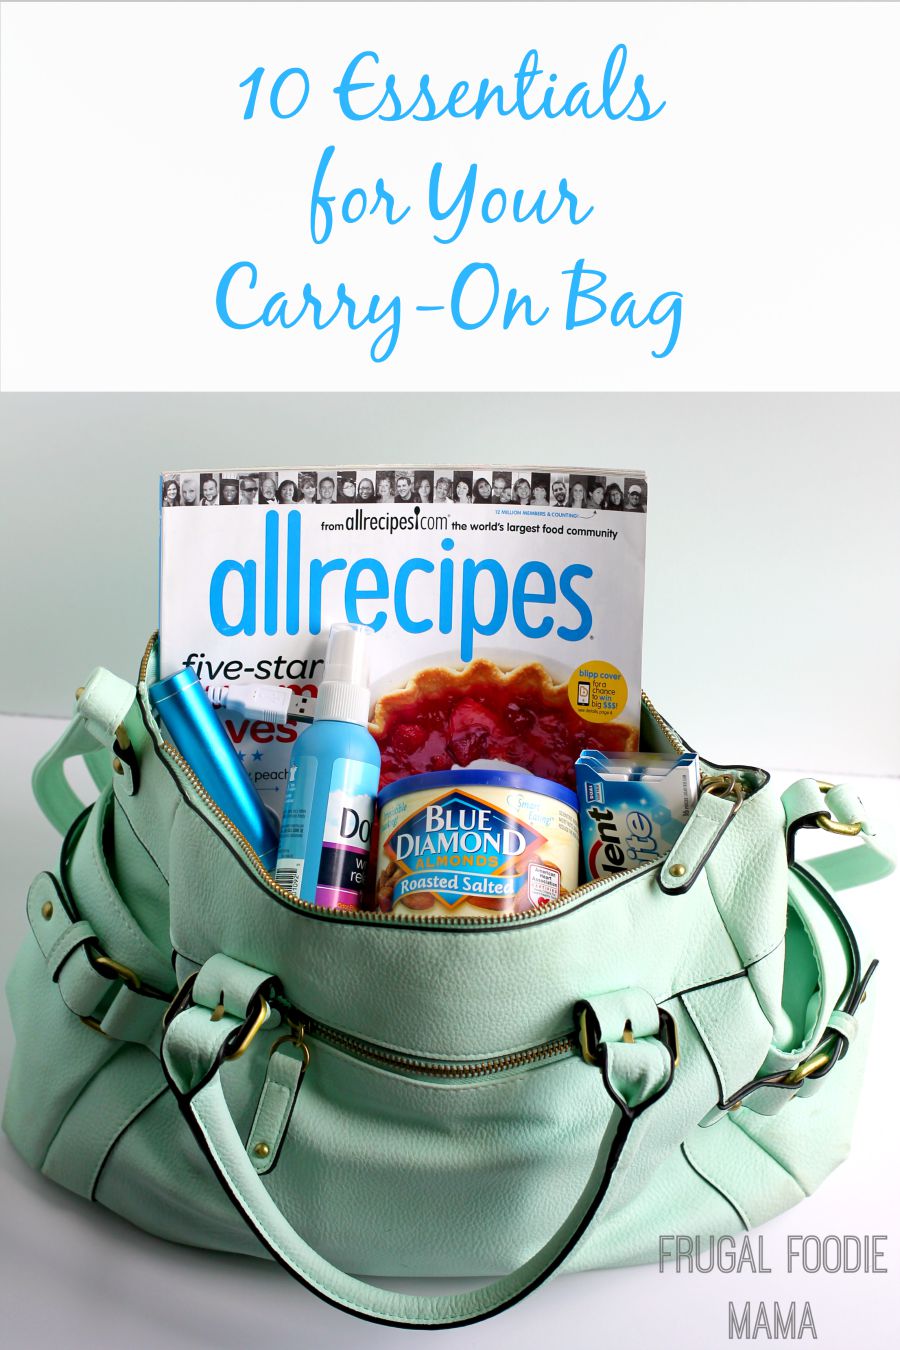 Frugal Foodie Mama: 10 Essentials for Your Carry-On Bag